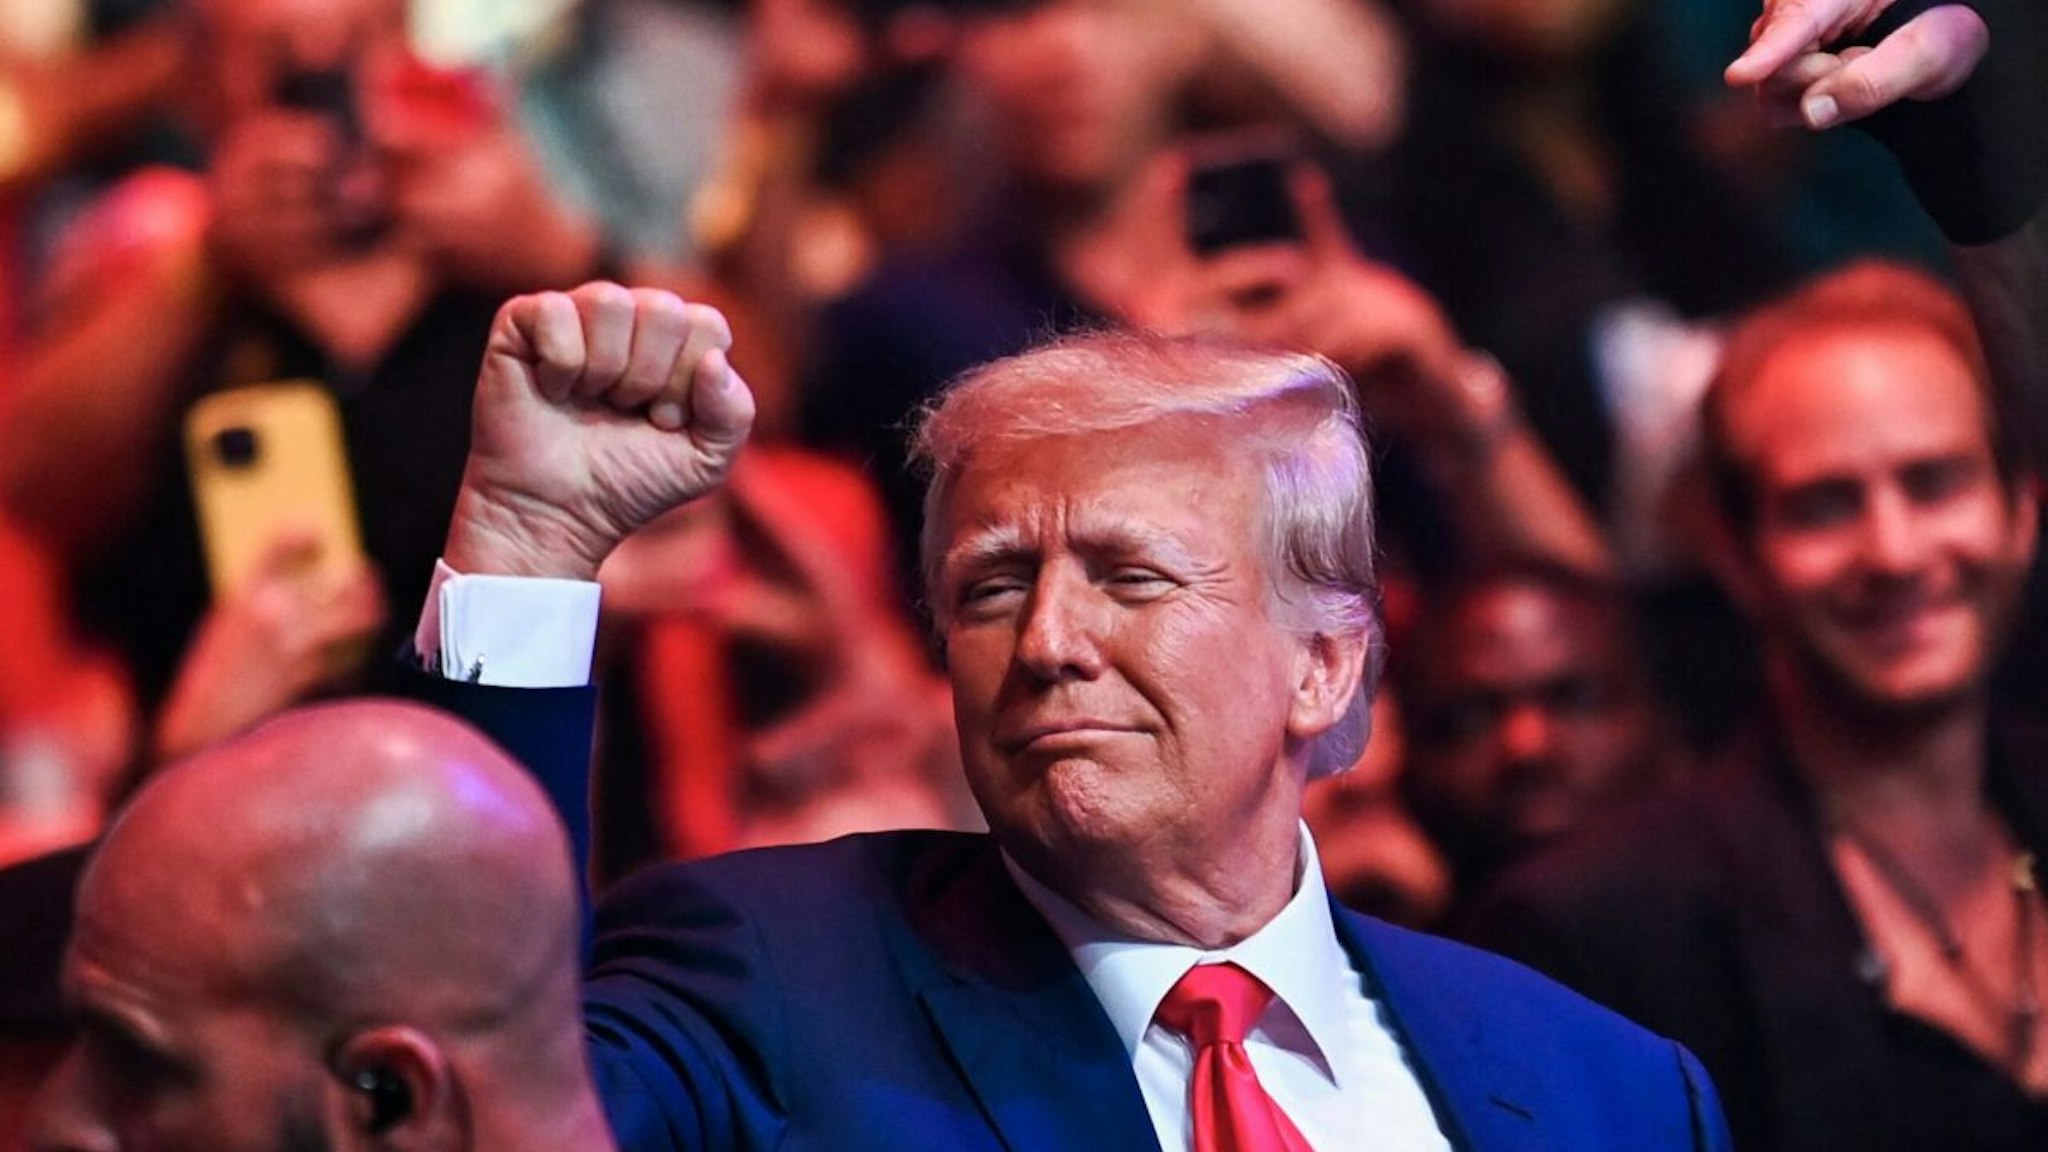 Former President Donald Trump attends the Ultimate Fighting Championship (UFC) 287 mixed martial arts event at the Kaseya Center in Miami, Florida, on April 8, 2023.